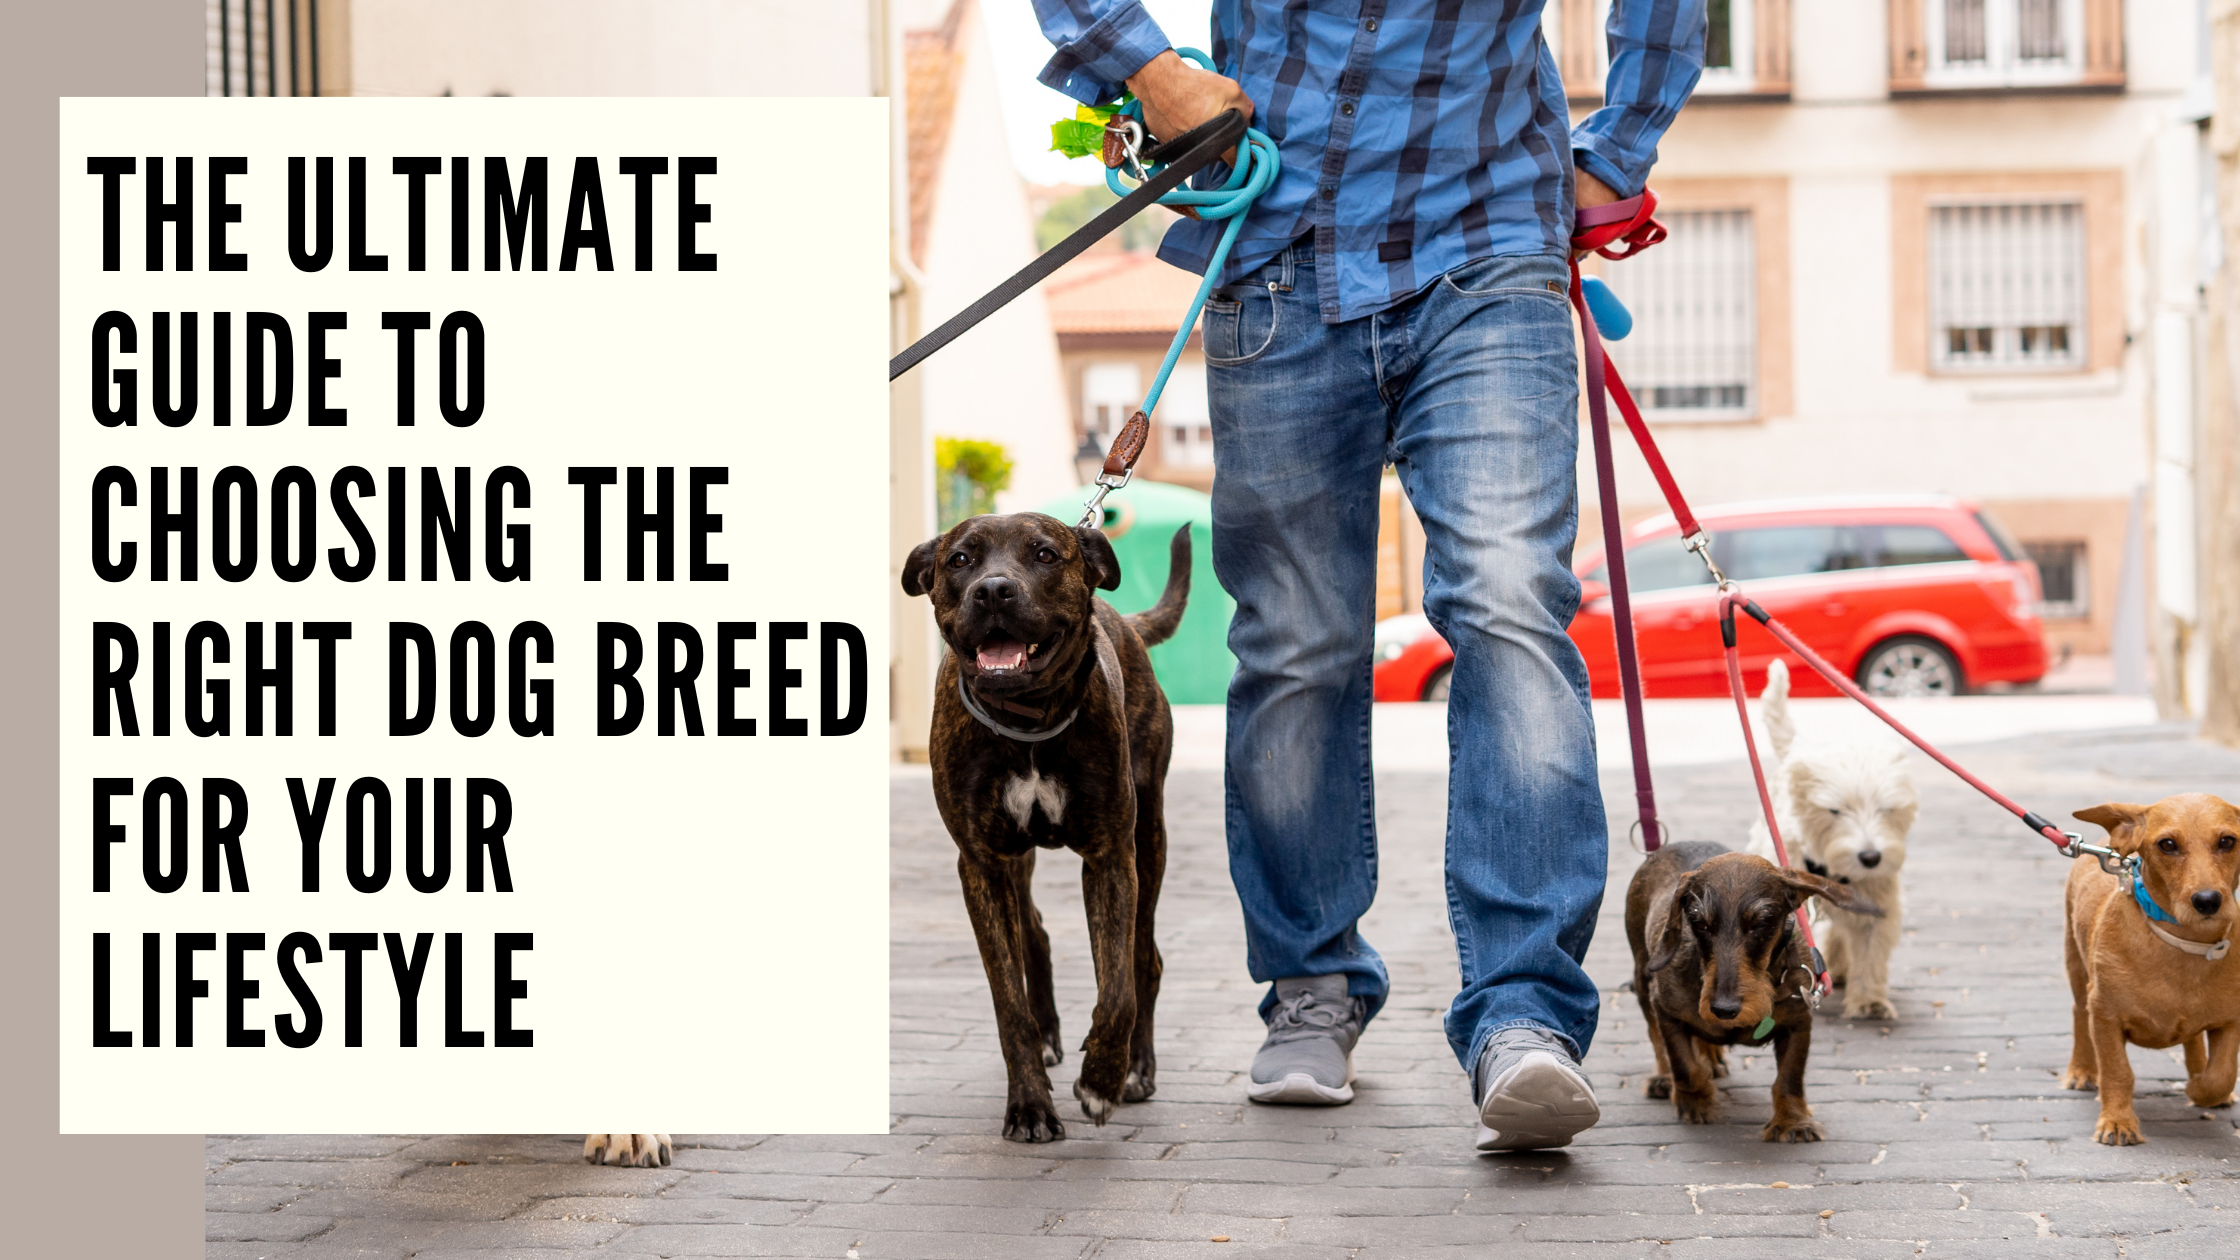 The Ultimate Guide to Choosing the Right Dog Breed for Your Lifestyle